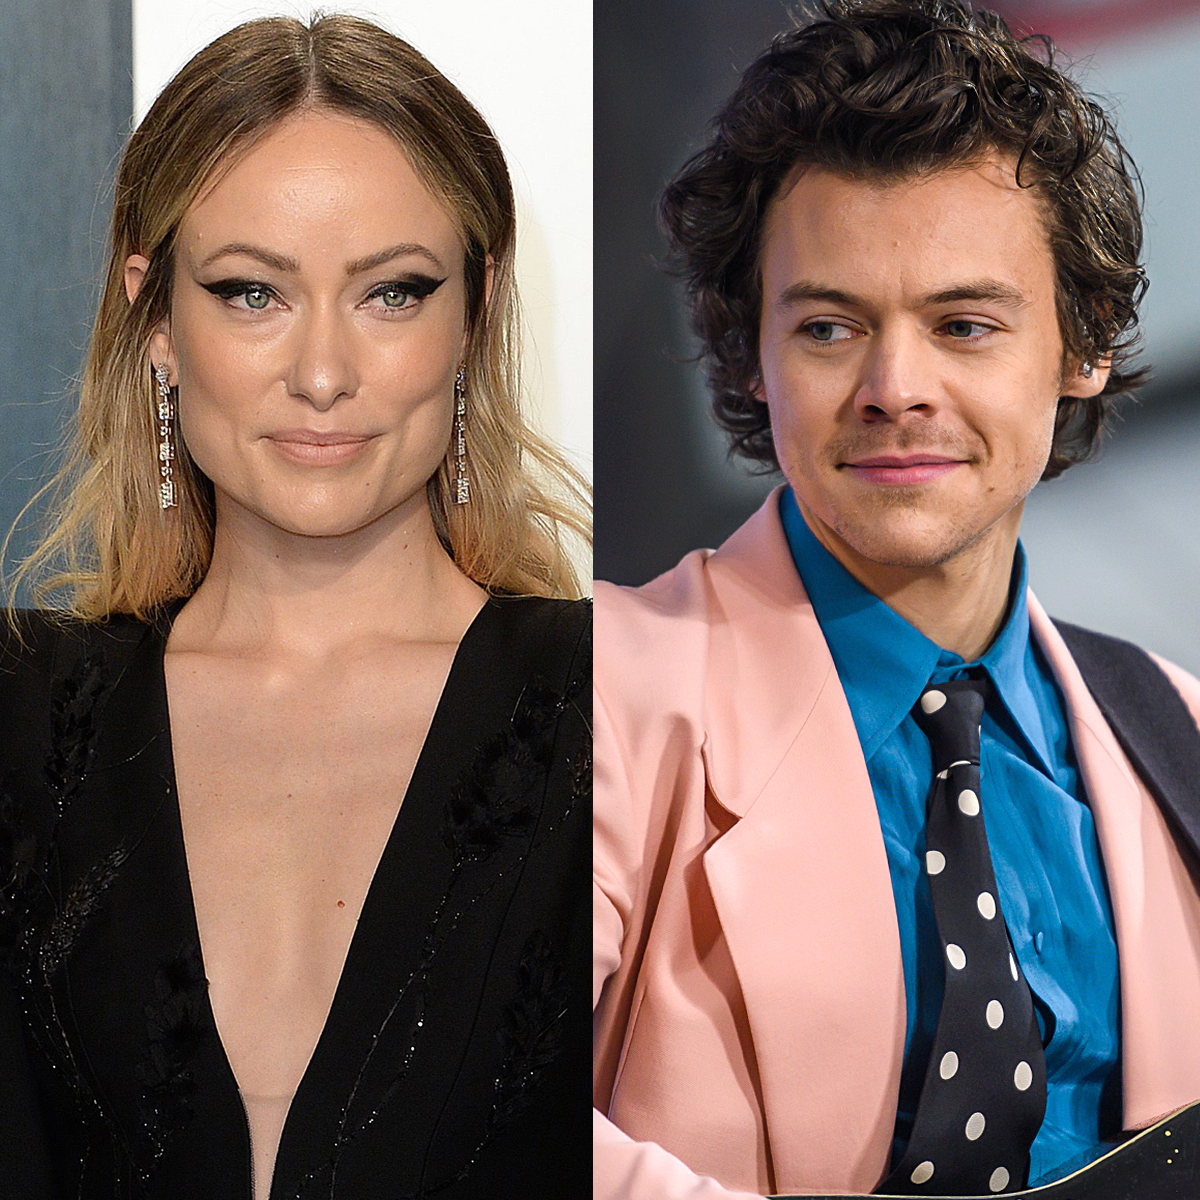 All the signs that Harry Styles and Olivia Wilde were headed for romance